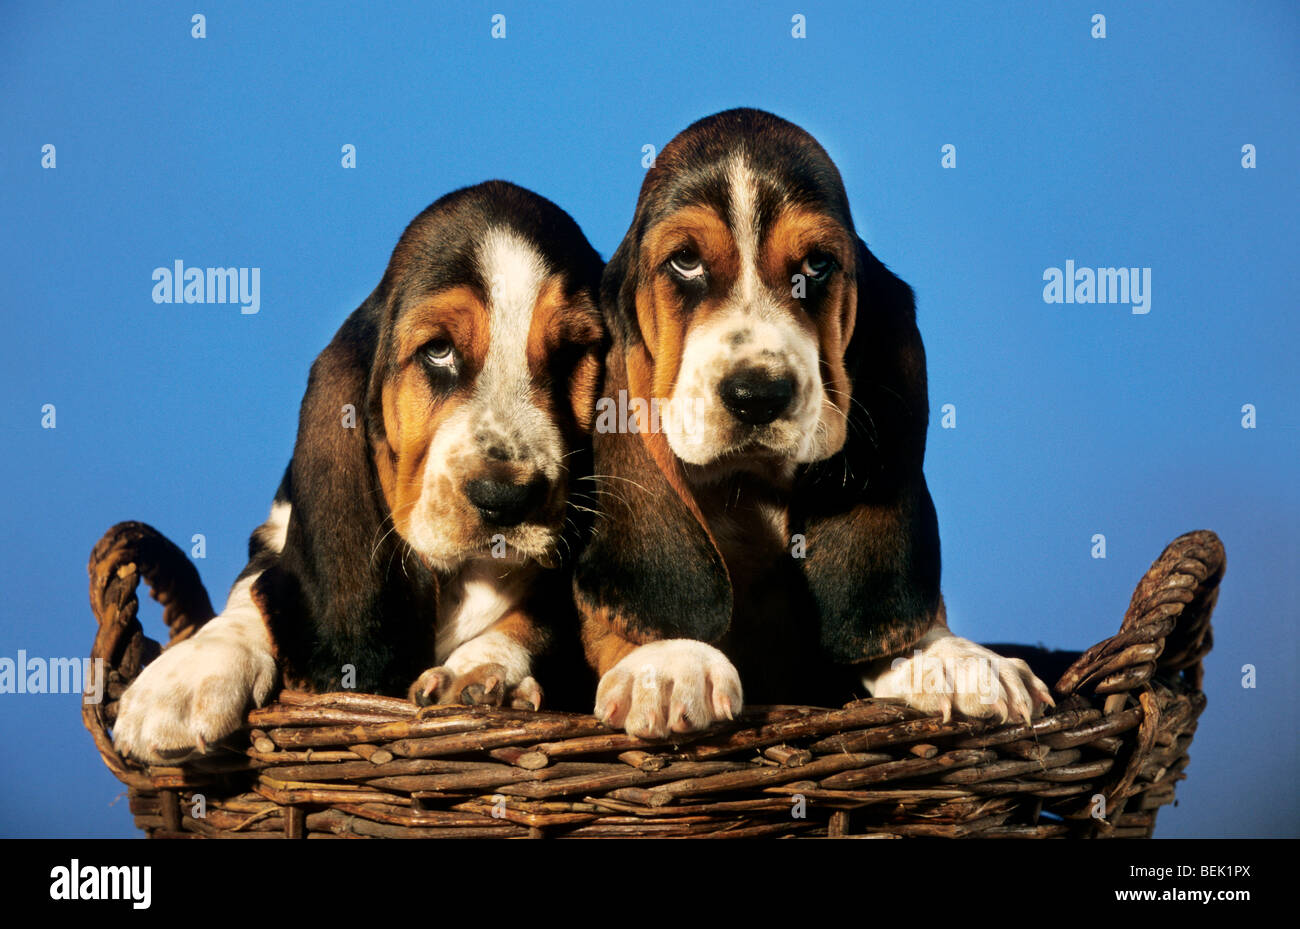 Two cute Basset hound dog pups (Canis lupus familiaris) sitting in a basket Stock Photo